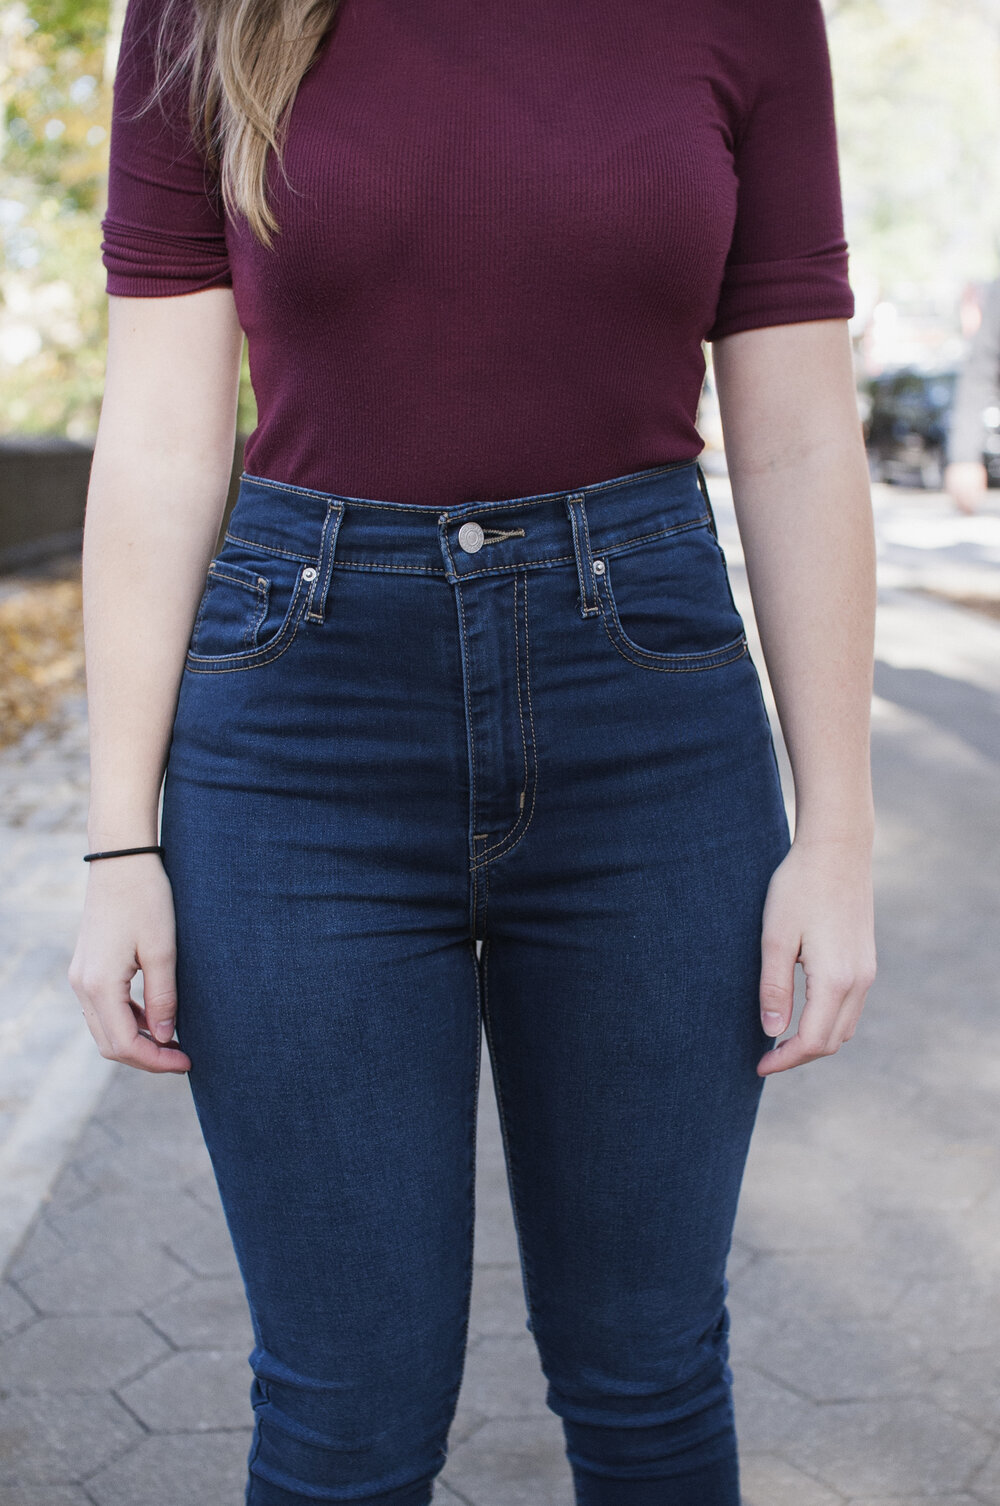 6 TIPS TO SIMPLIFY DENIM SHOPPING — The Petite Pear